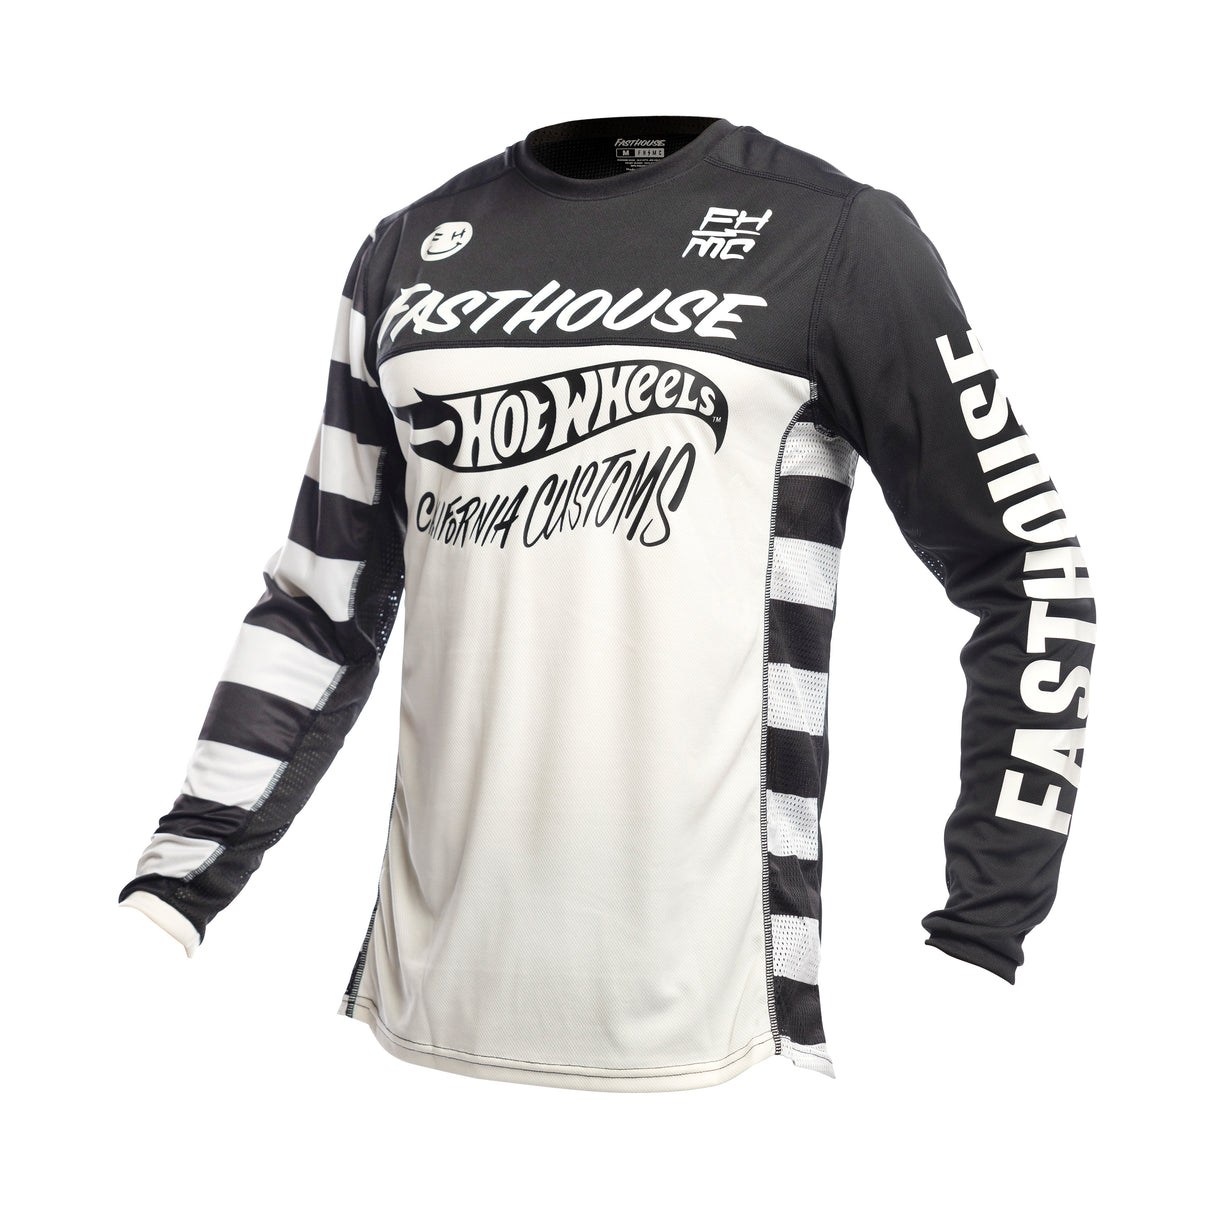 Fasthouse Youth Grindhouse Hot Wheels Long Sleeve Jersey